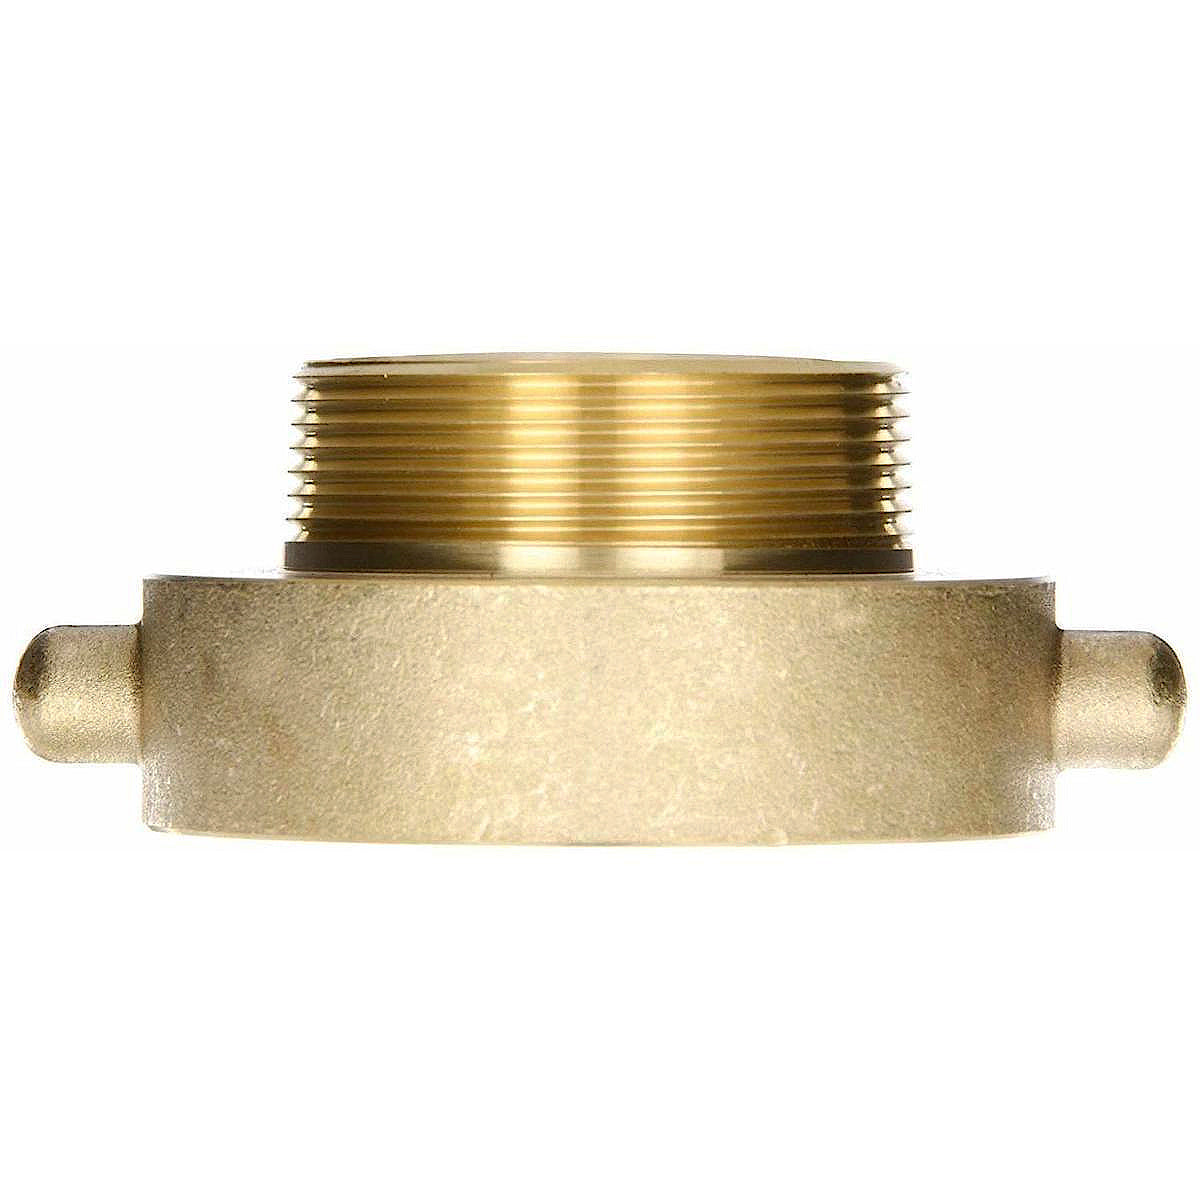 Fire Hydrant Adapter 2.5 NST (NH) Female x 1.5 NST (NH) Male –